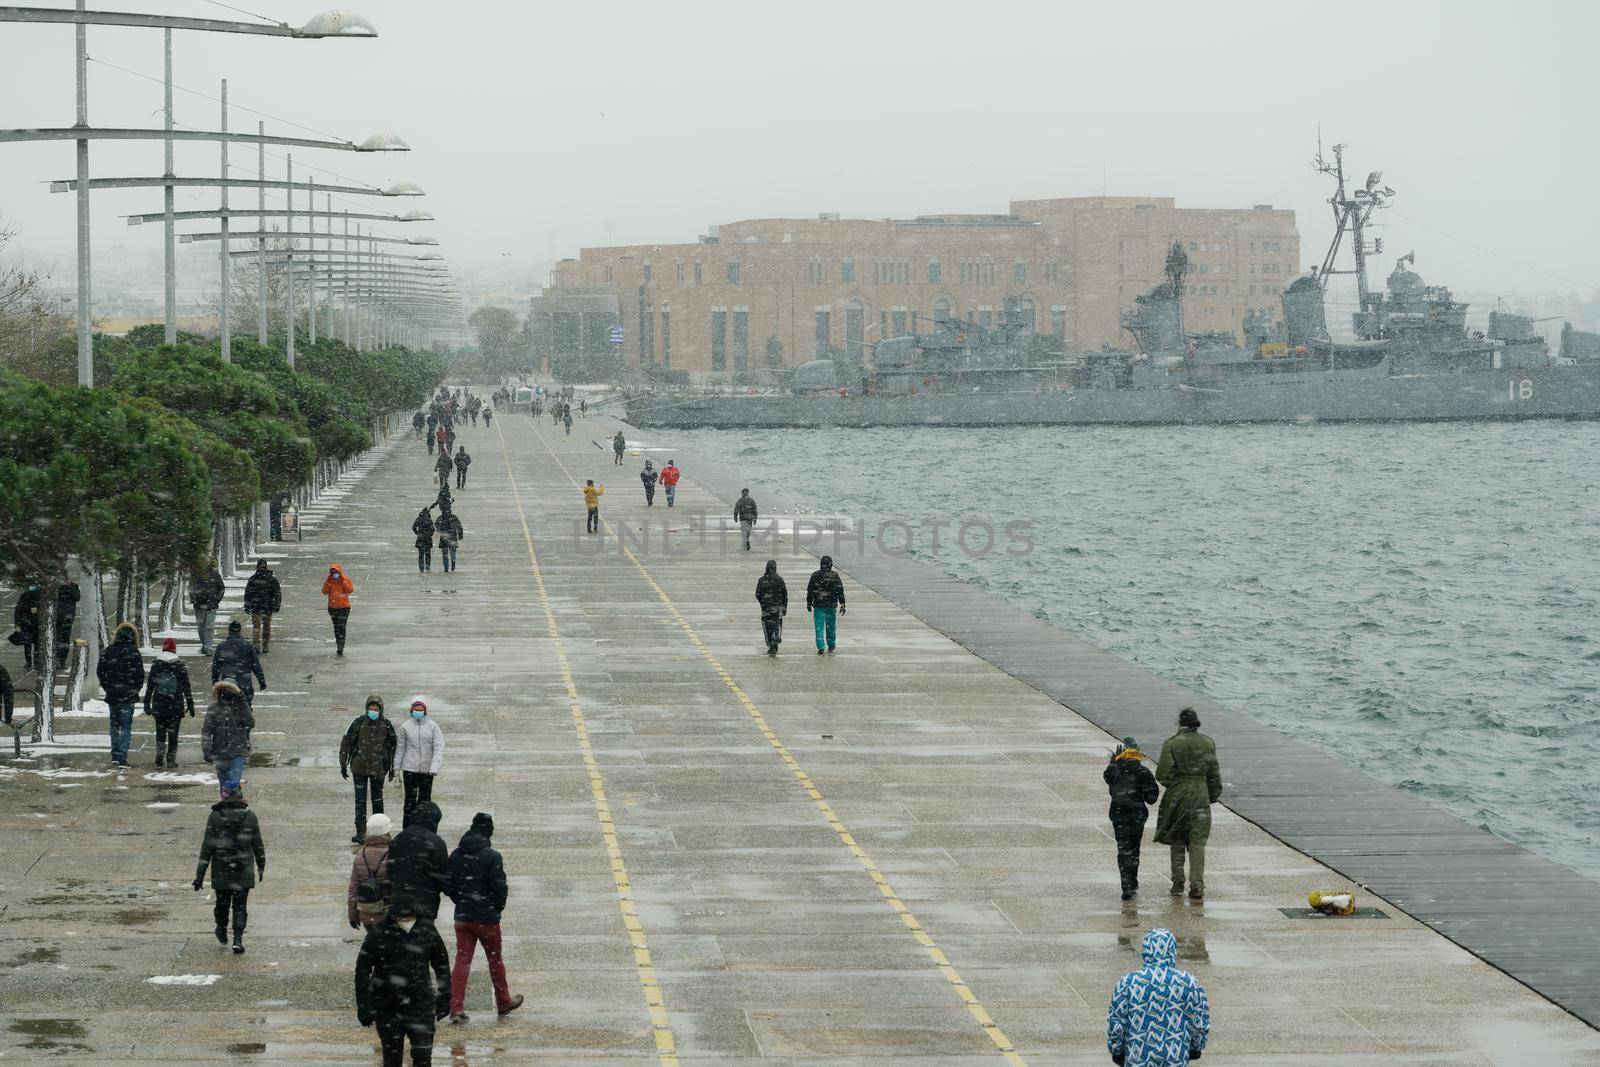 People in warm clothes and covid-19 masks walk at the waterfront with snow falling.